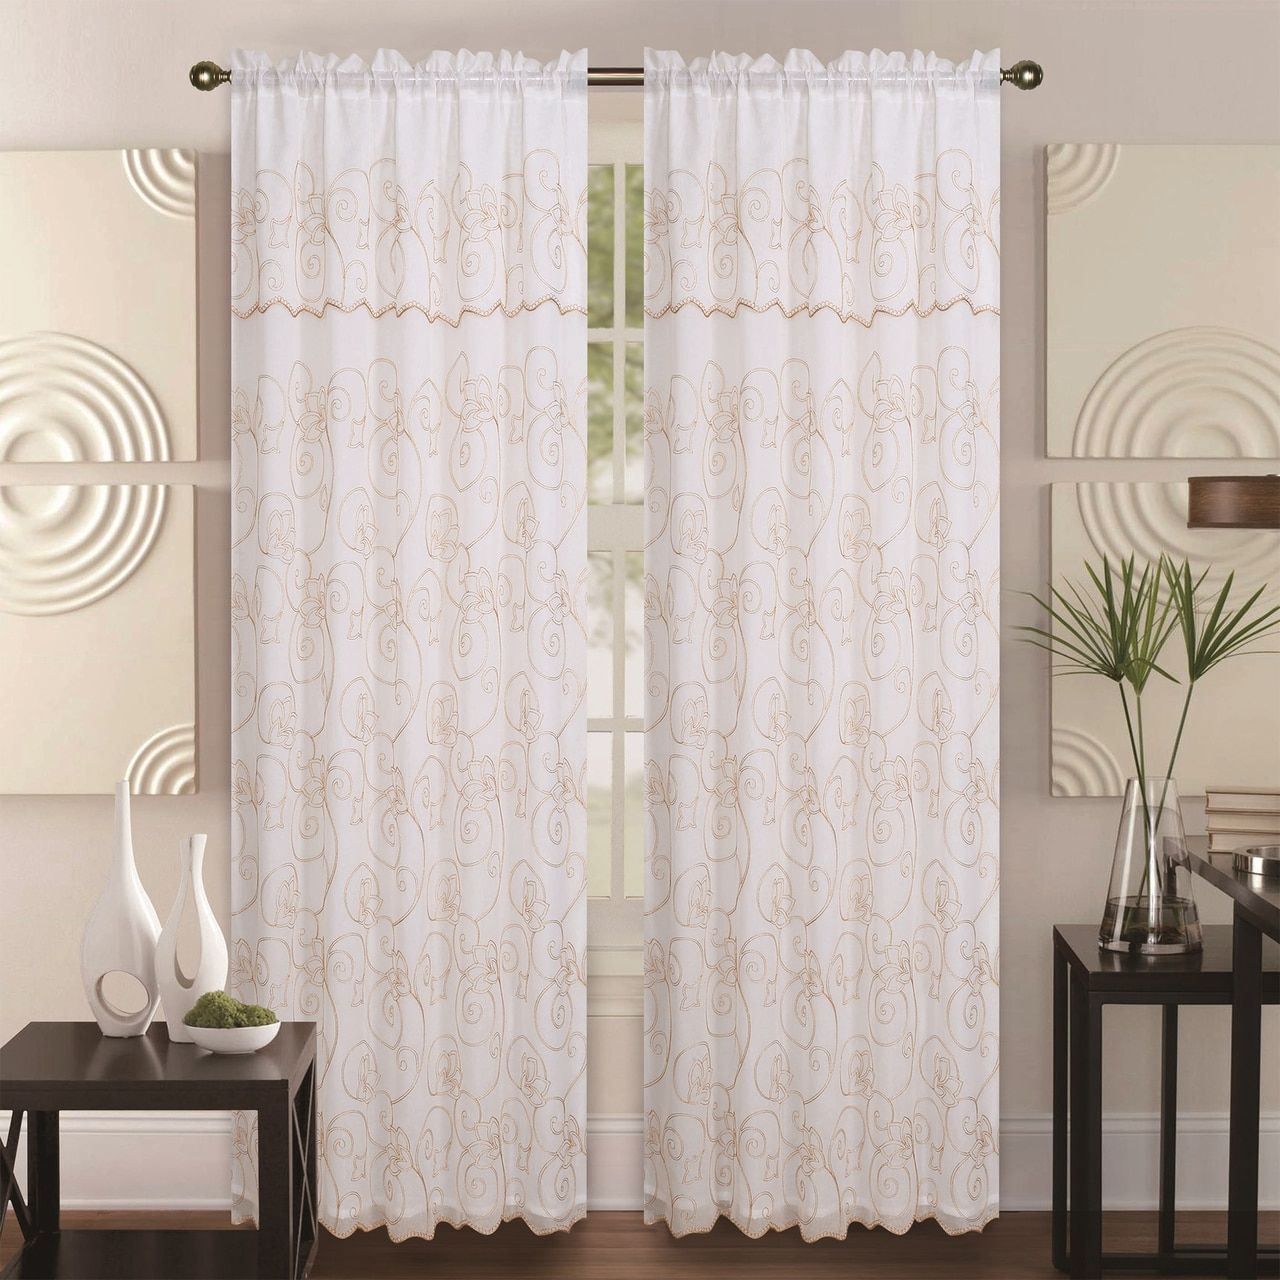 Double Layer Embroidery Floral Sheer Linen Front / Faux Silk Back Rod  Pocket Valance Decorative Curtain Panel 55x84 Inch, Selma Single Drape Panel Intended For Double Layer Sheer White Single Curtain Panels (View 9 of 20)